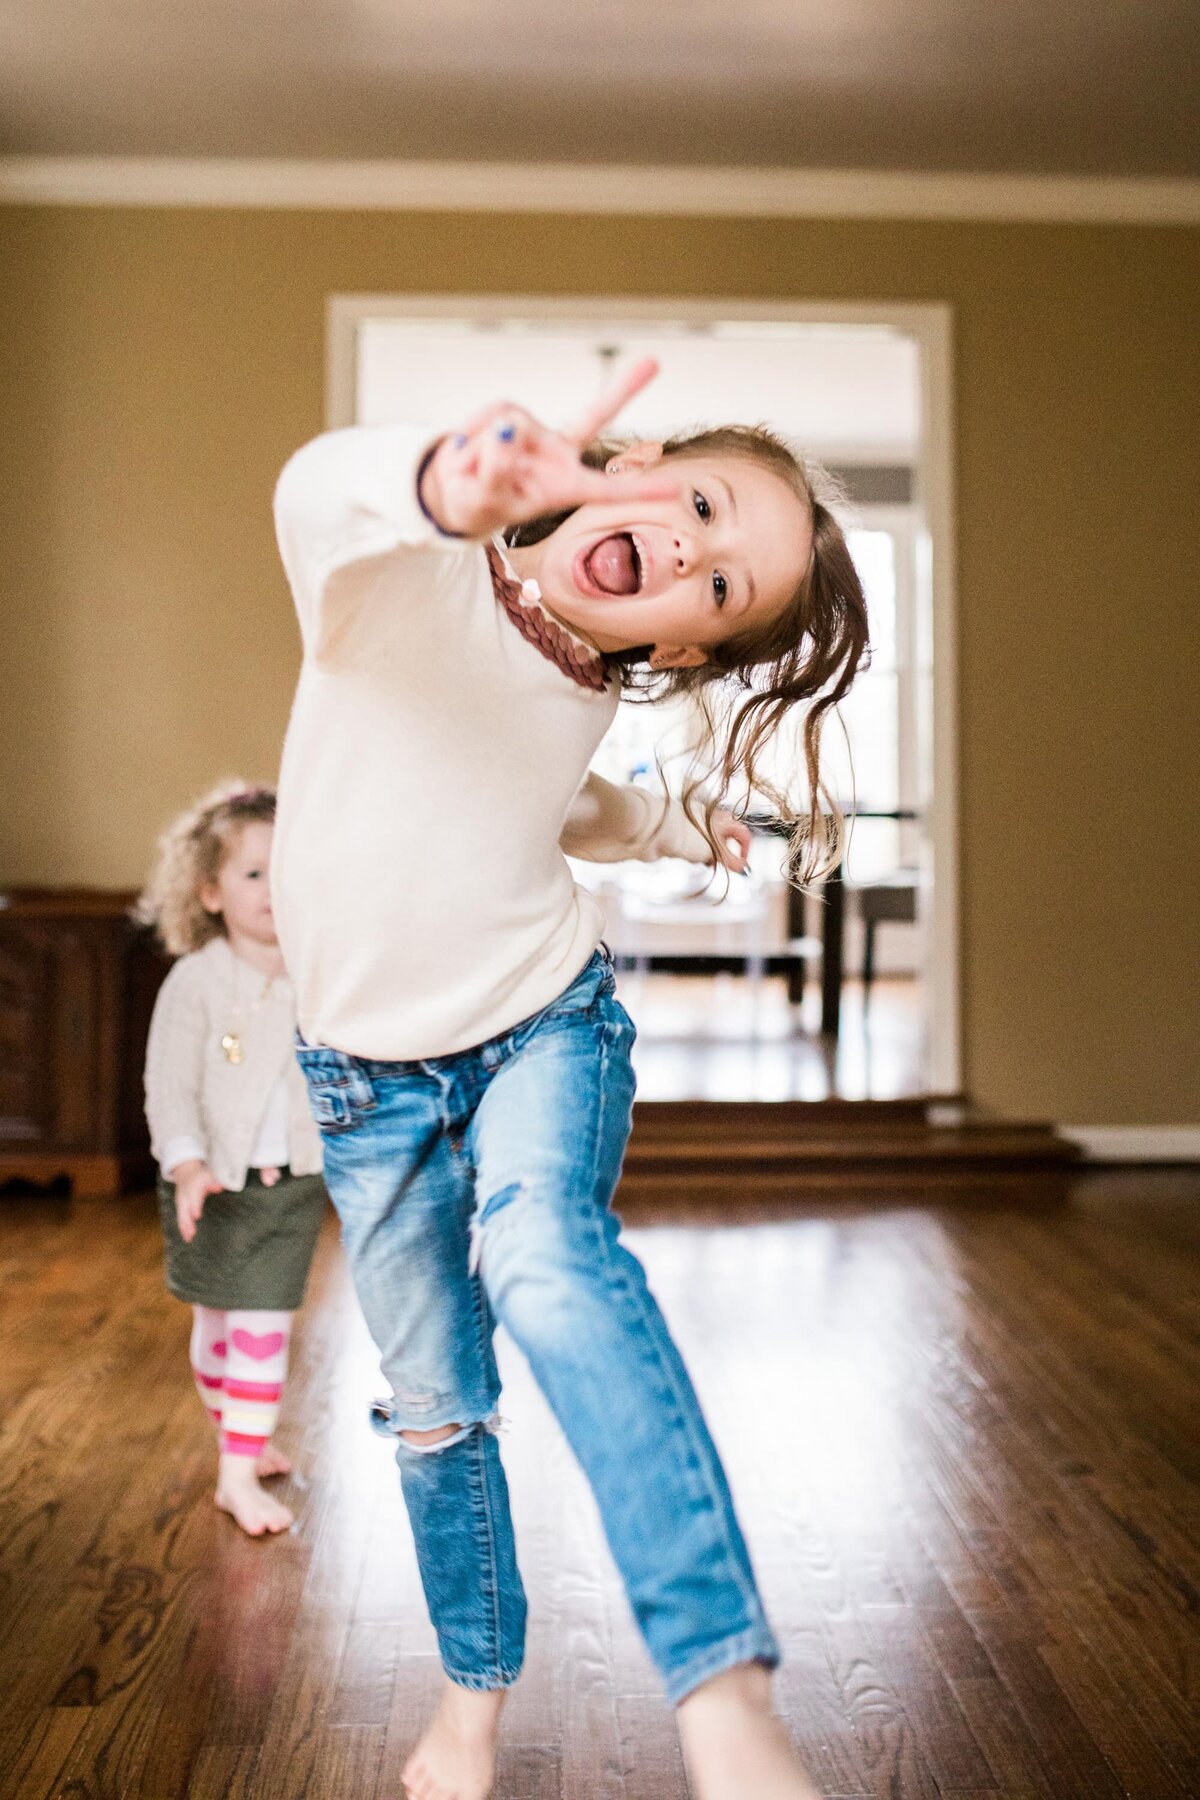 A young girl joyfully jumping in a living room, sticking out her tongue, with another child watching in the background during a DIY family photoshoot.